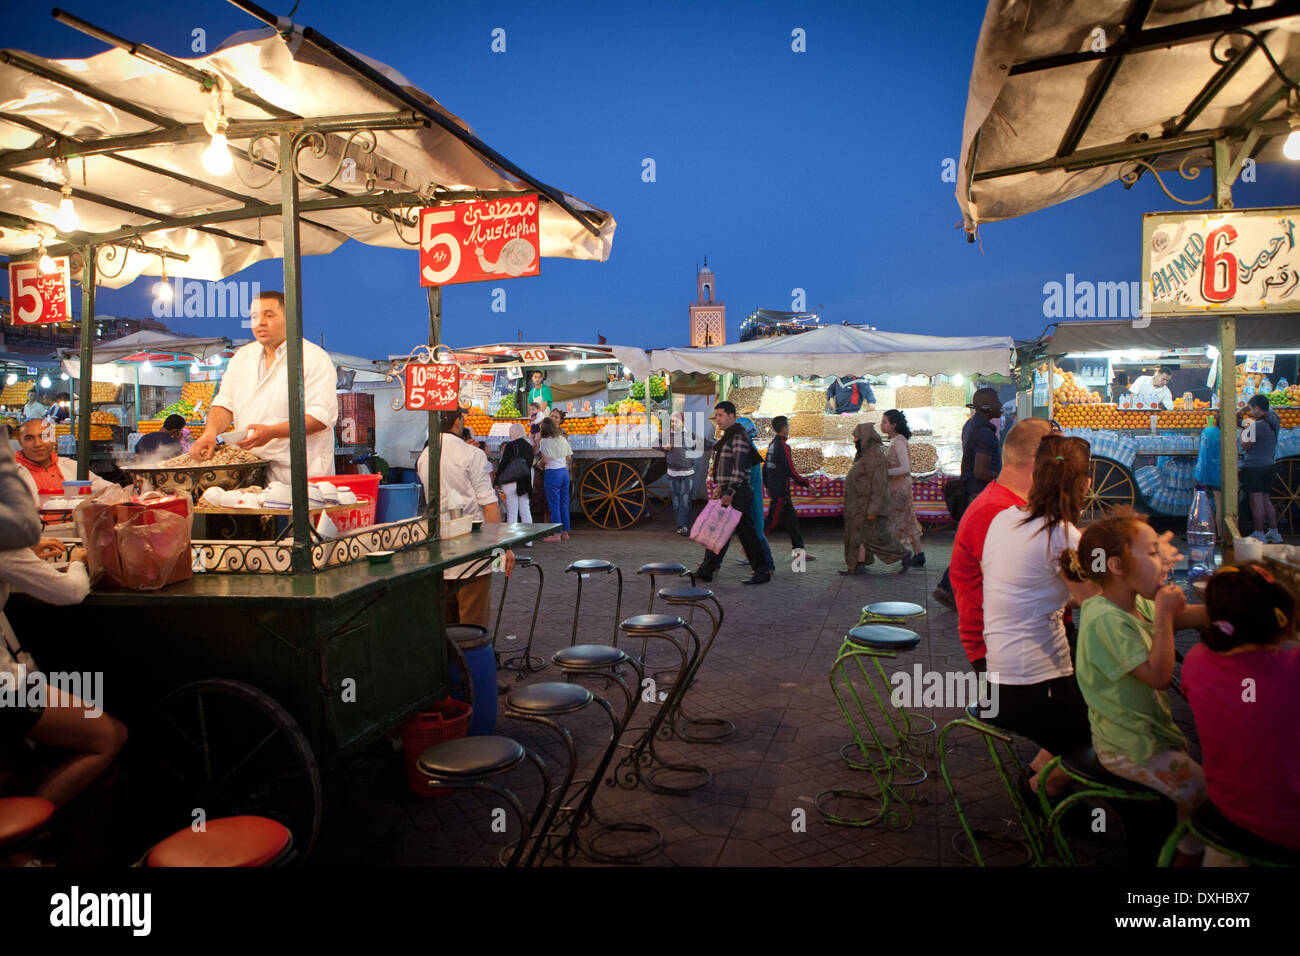 Africa, Morocco, Marrakech, Djemaa El Fna, UNESCO square market place by night Stock Photo